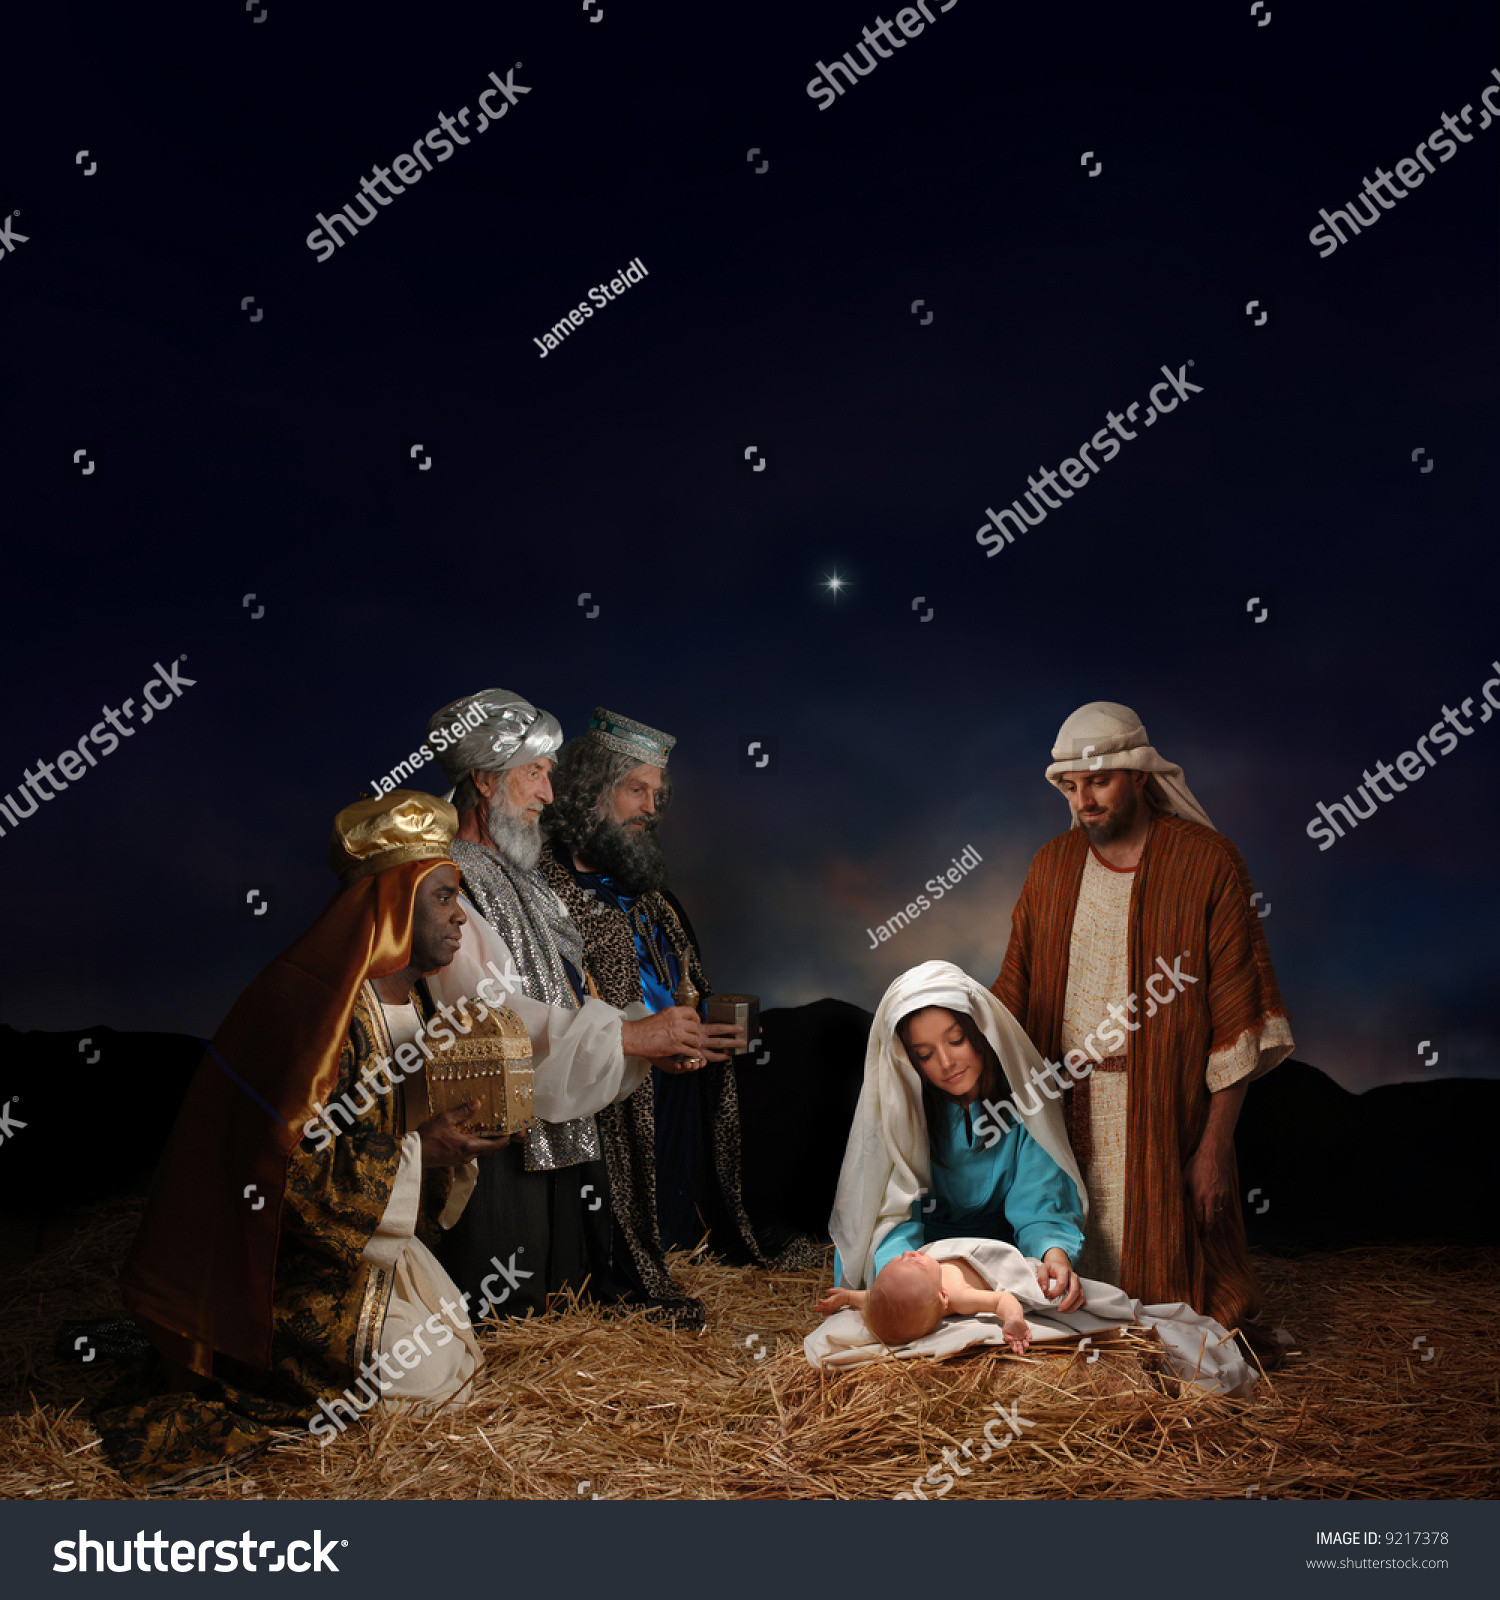 3 Gifts To Baby Jesus
 Christmas Nativity Scene With Three Wise Men Presenting